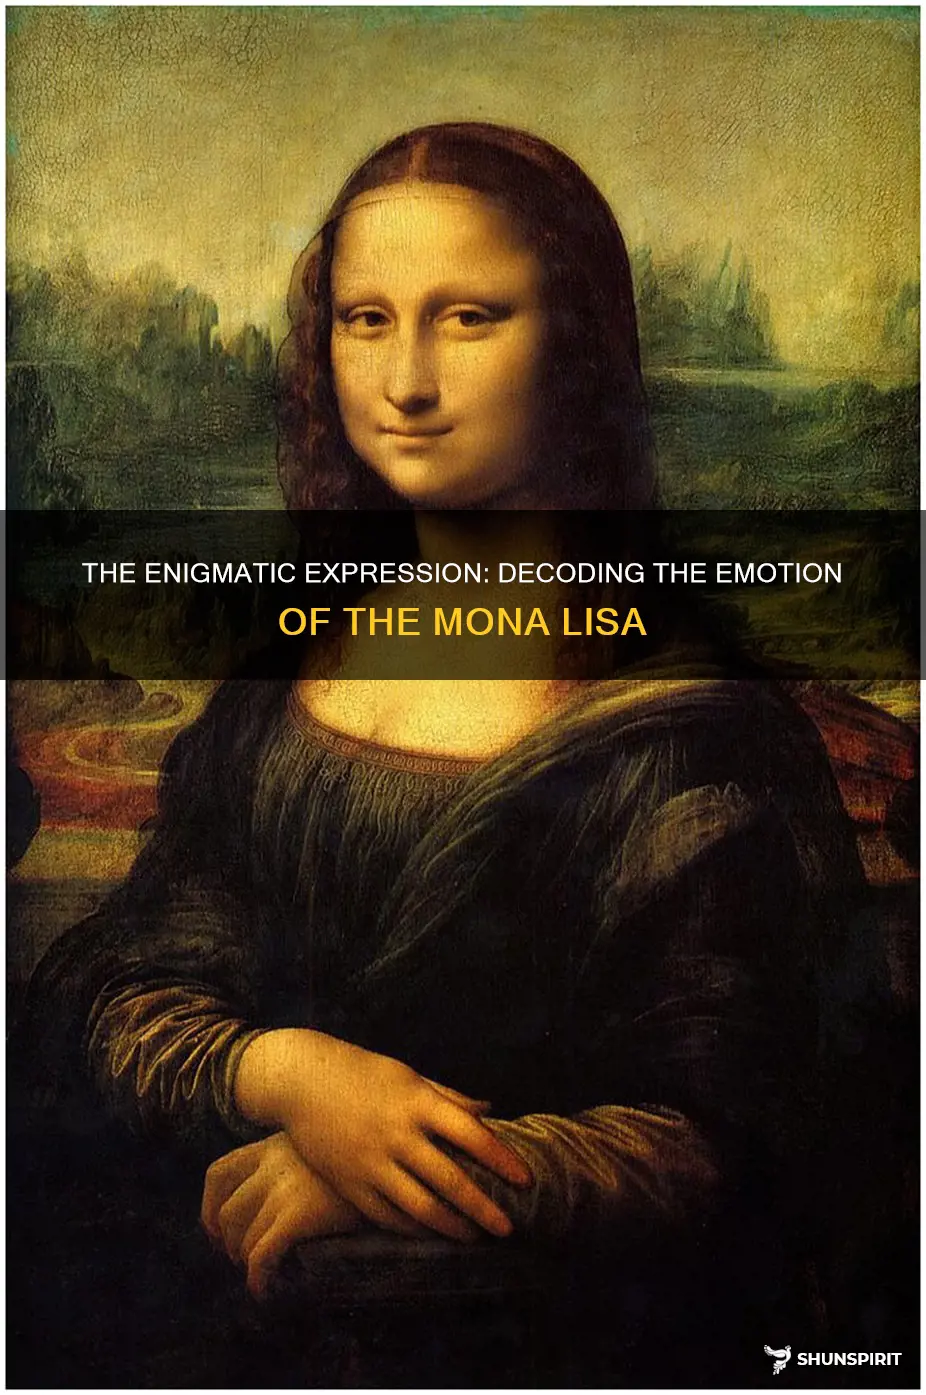 what emotion is the mona lisa showing